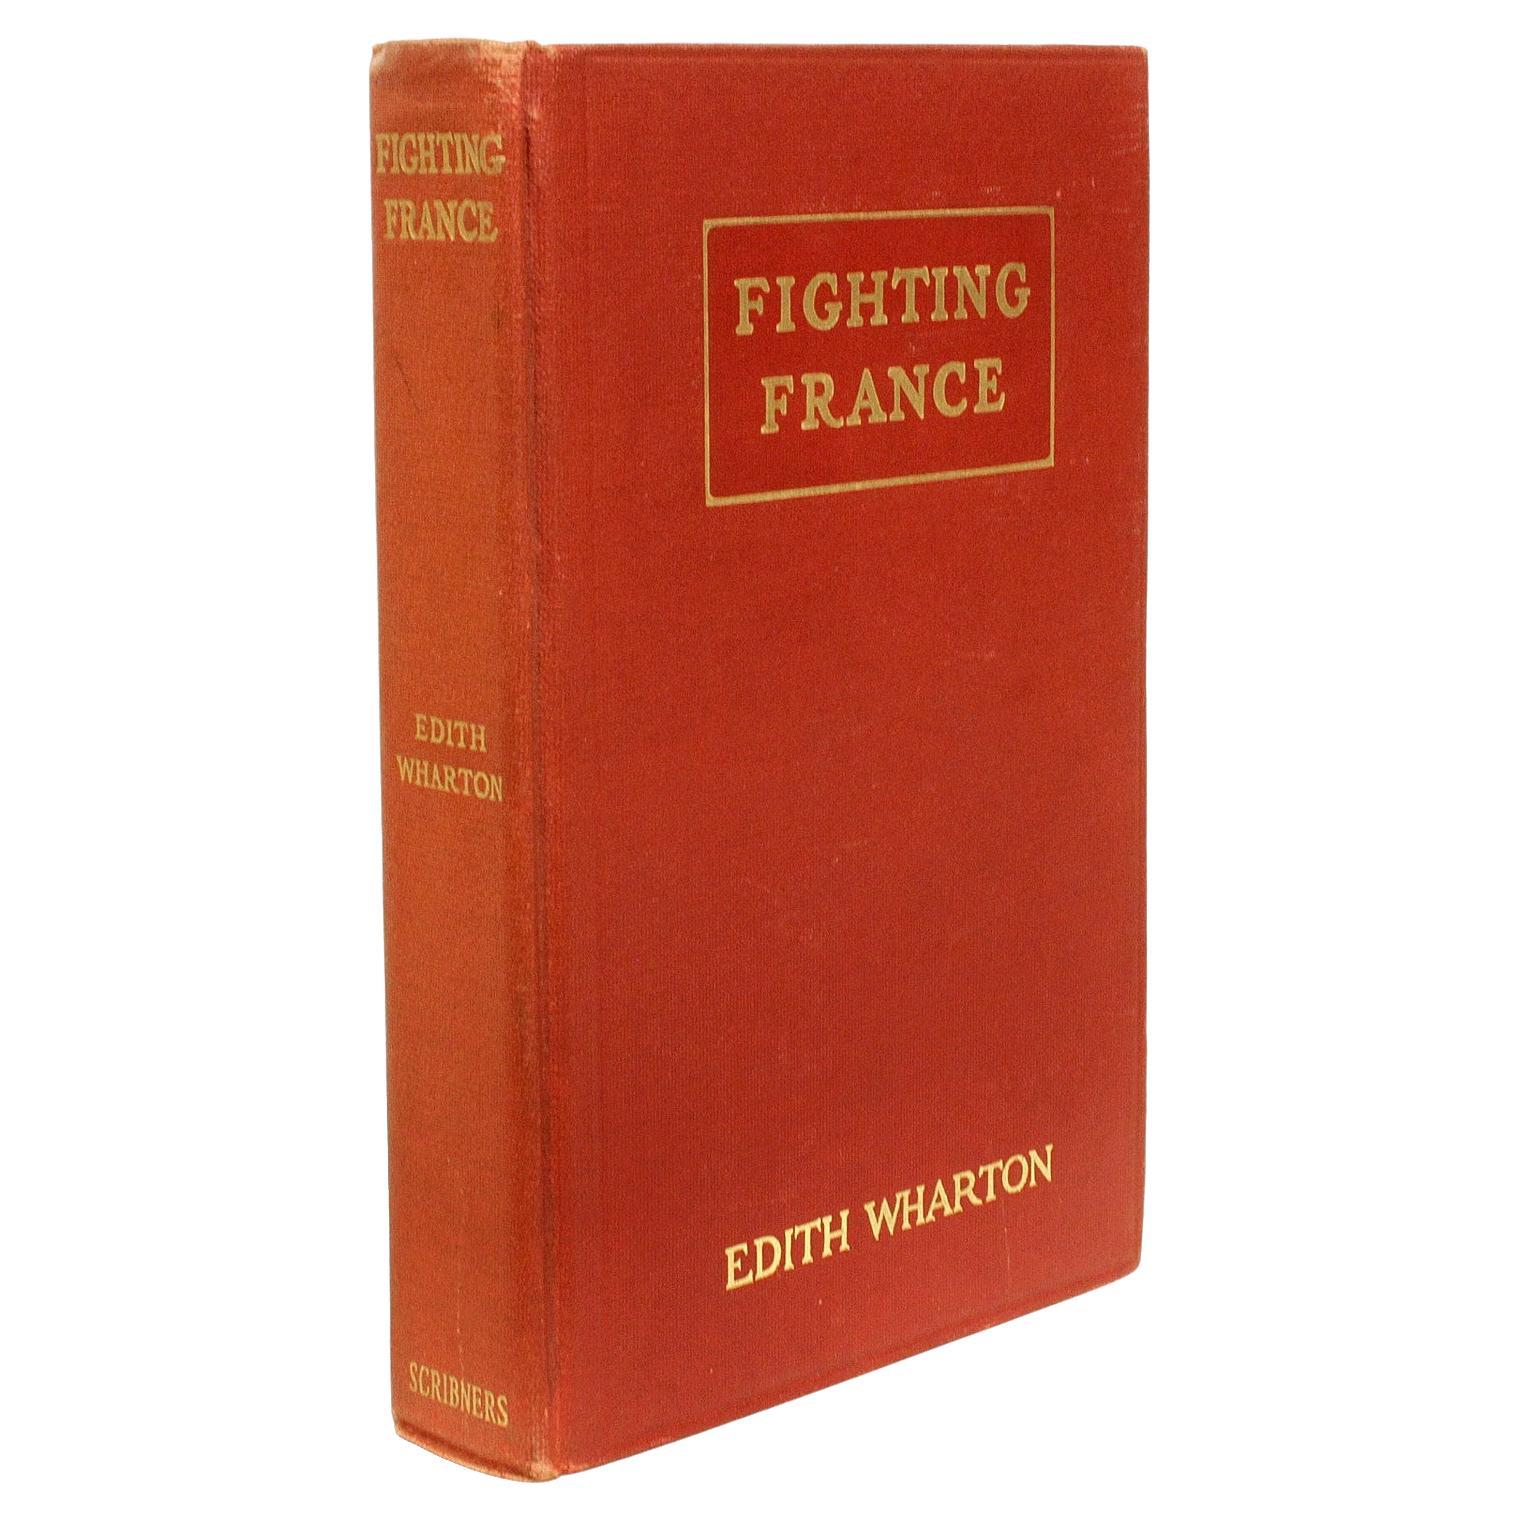 Wharton, Edith, Fighting France. First Edition - 1915 - A Bright Copy